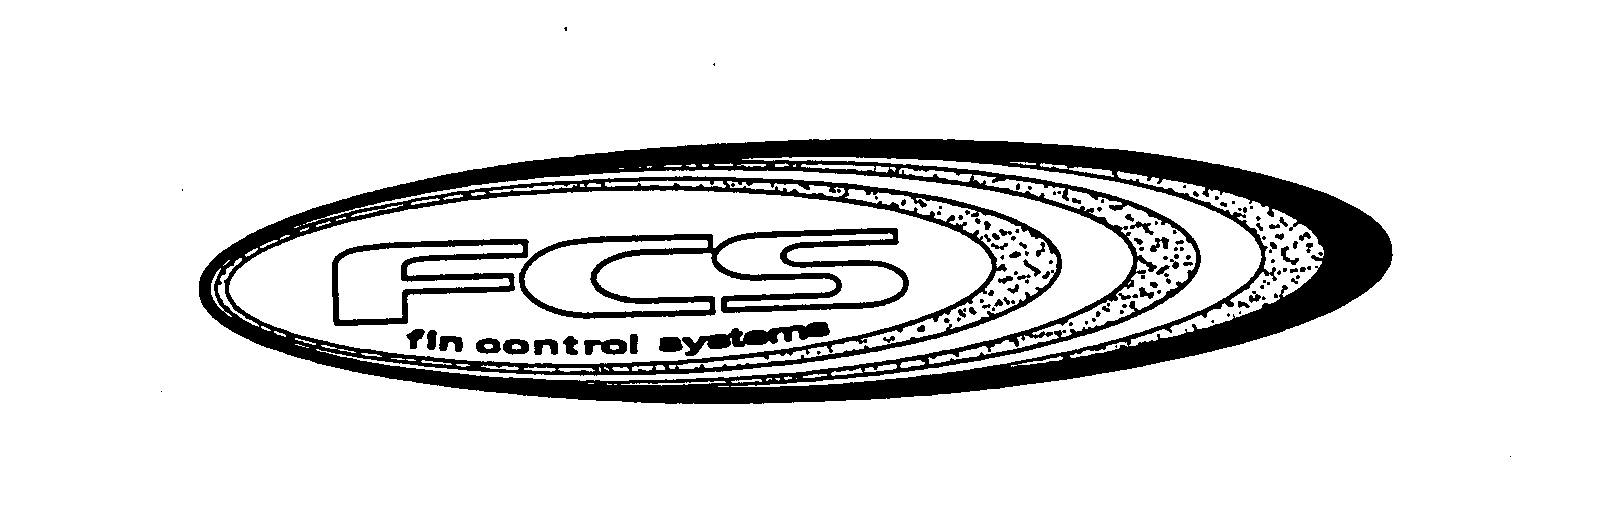  FCS FIN CONTROL SYSTEMS